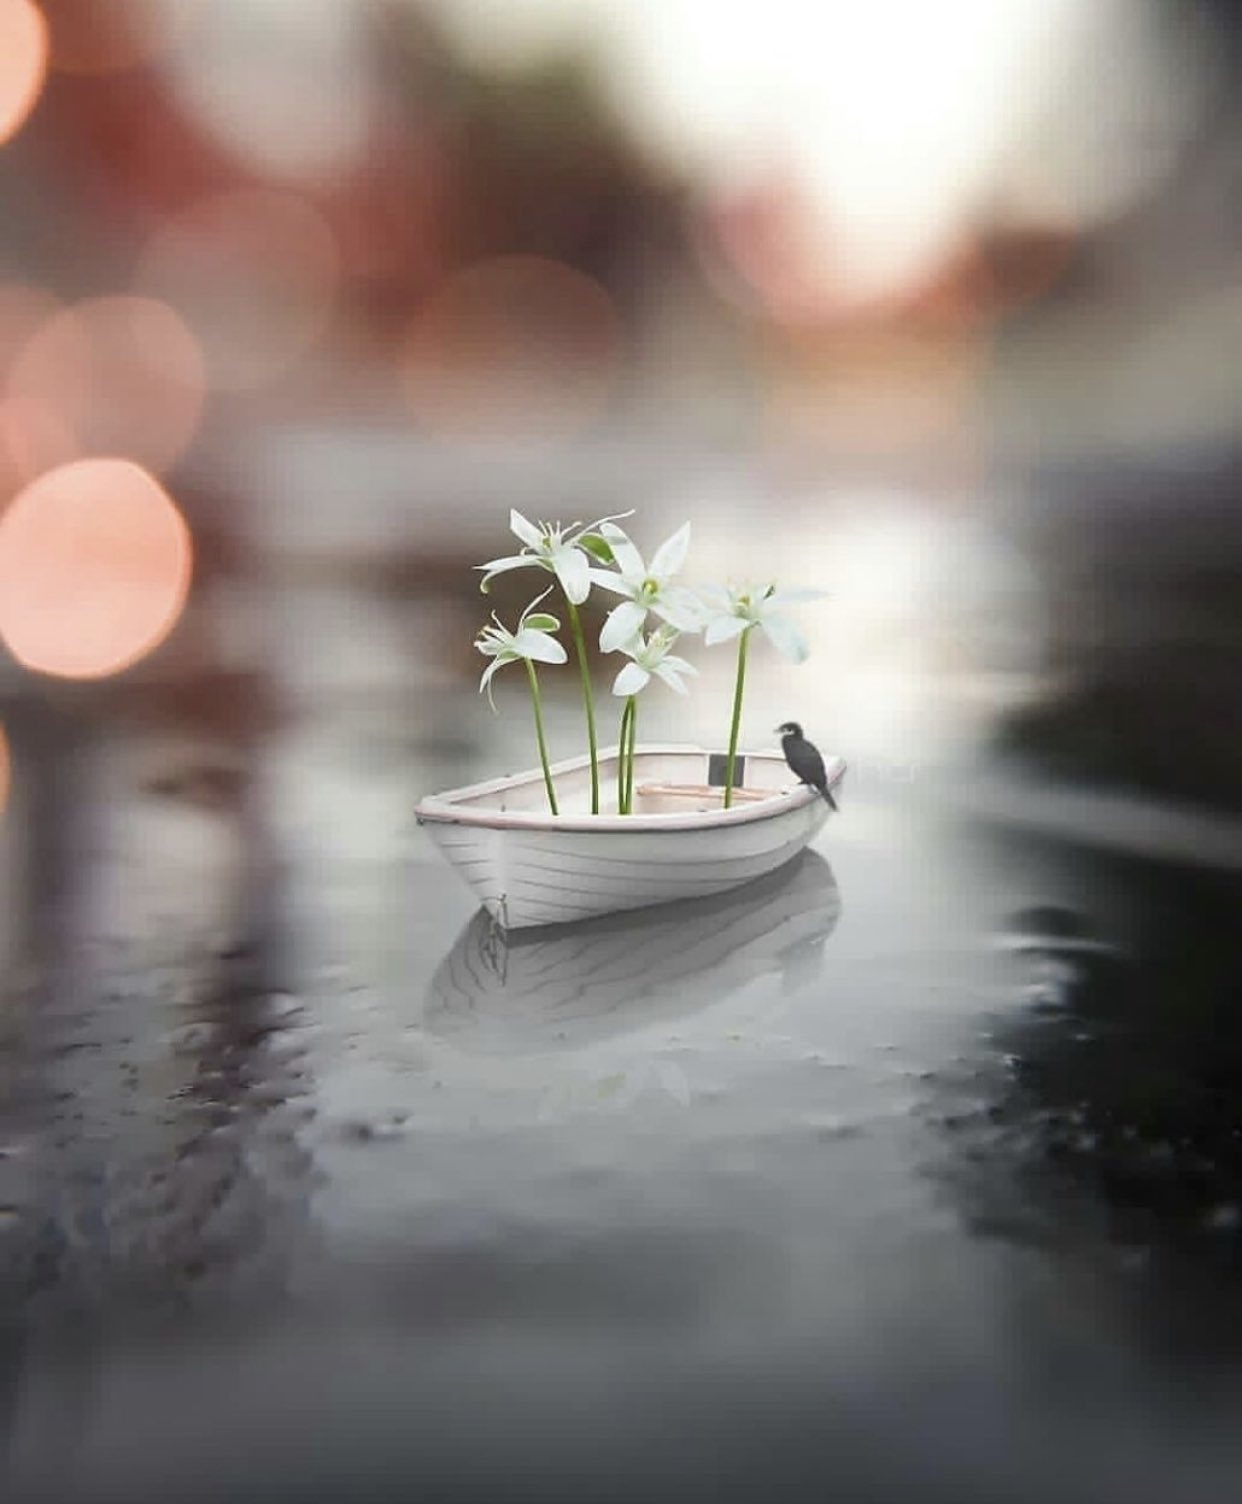 15 Miniature Photography Ideas for Amazing Toy Shots